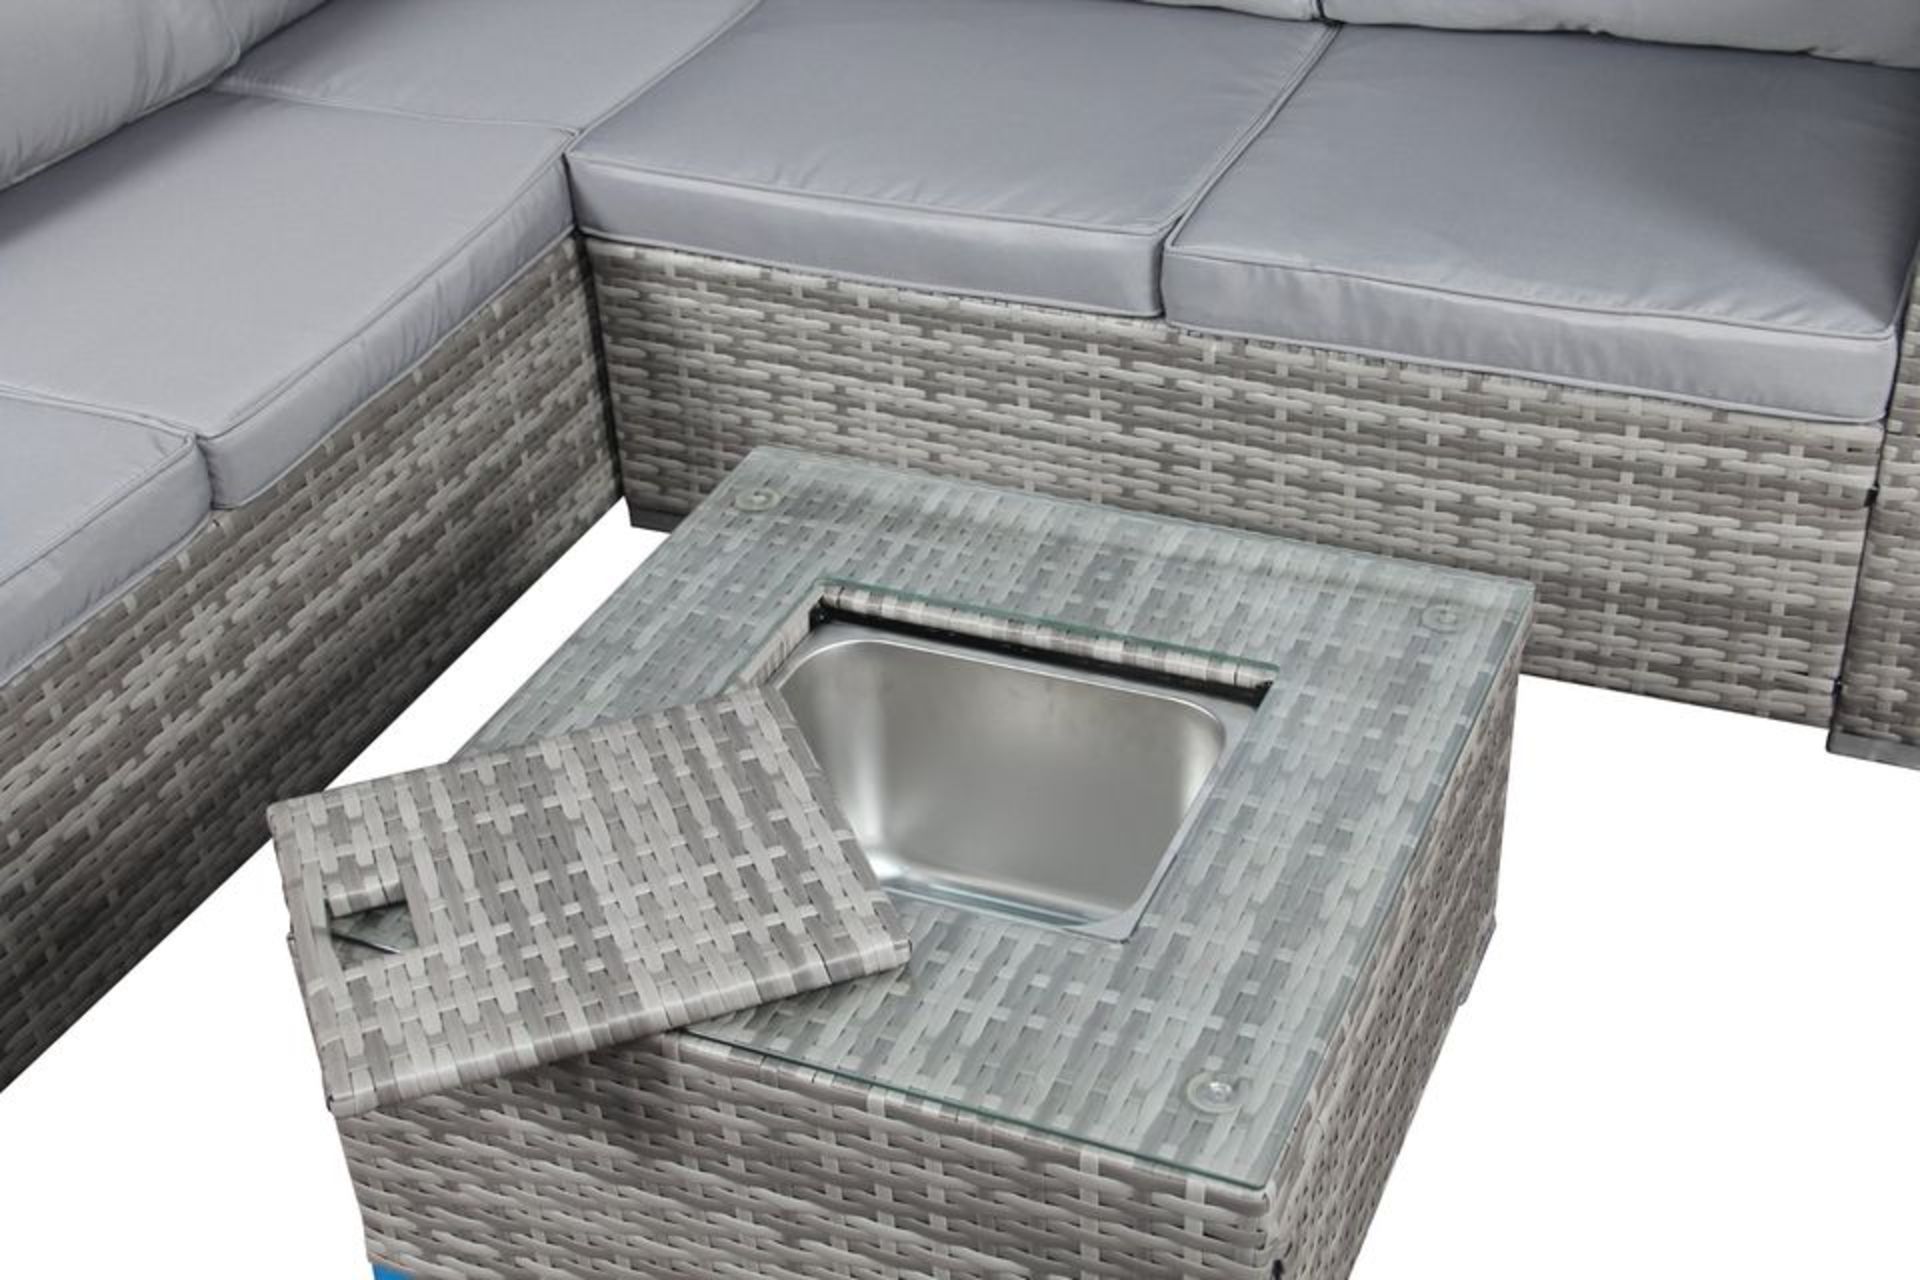 Brand new sets of garden furniture with ice storage box built into the table, RRP £999 *PLUS VAT* - Image 5 of 6